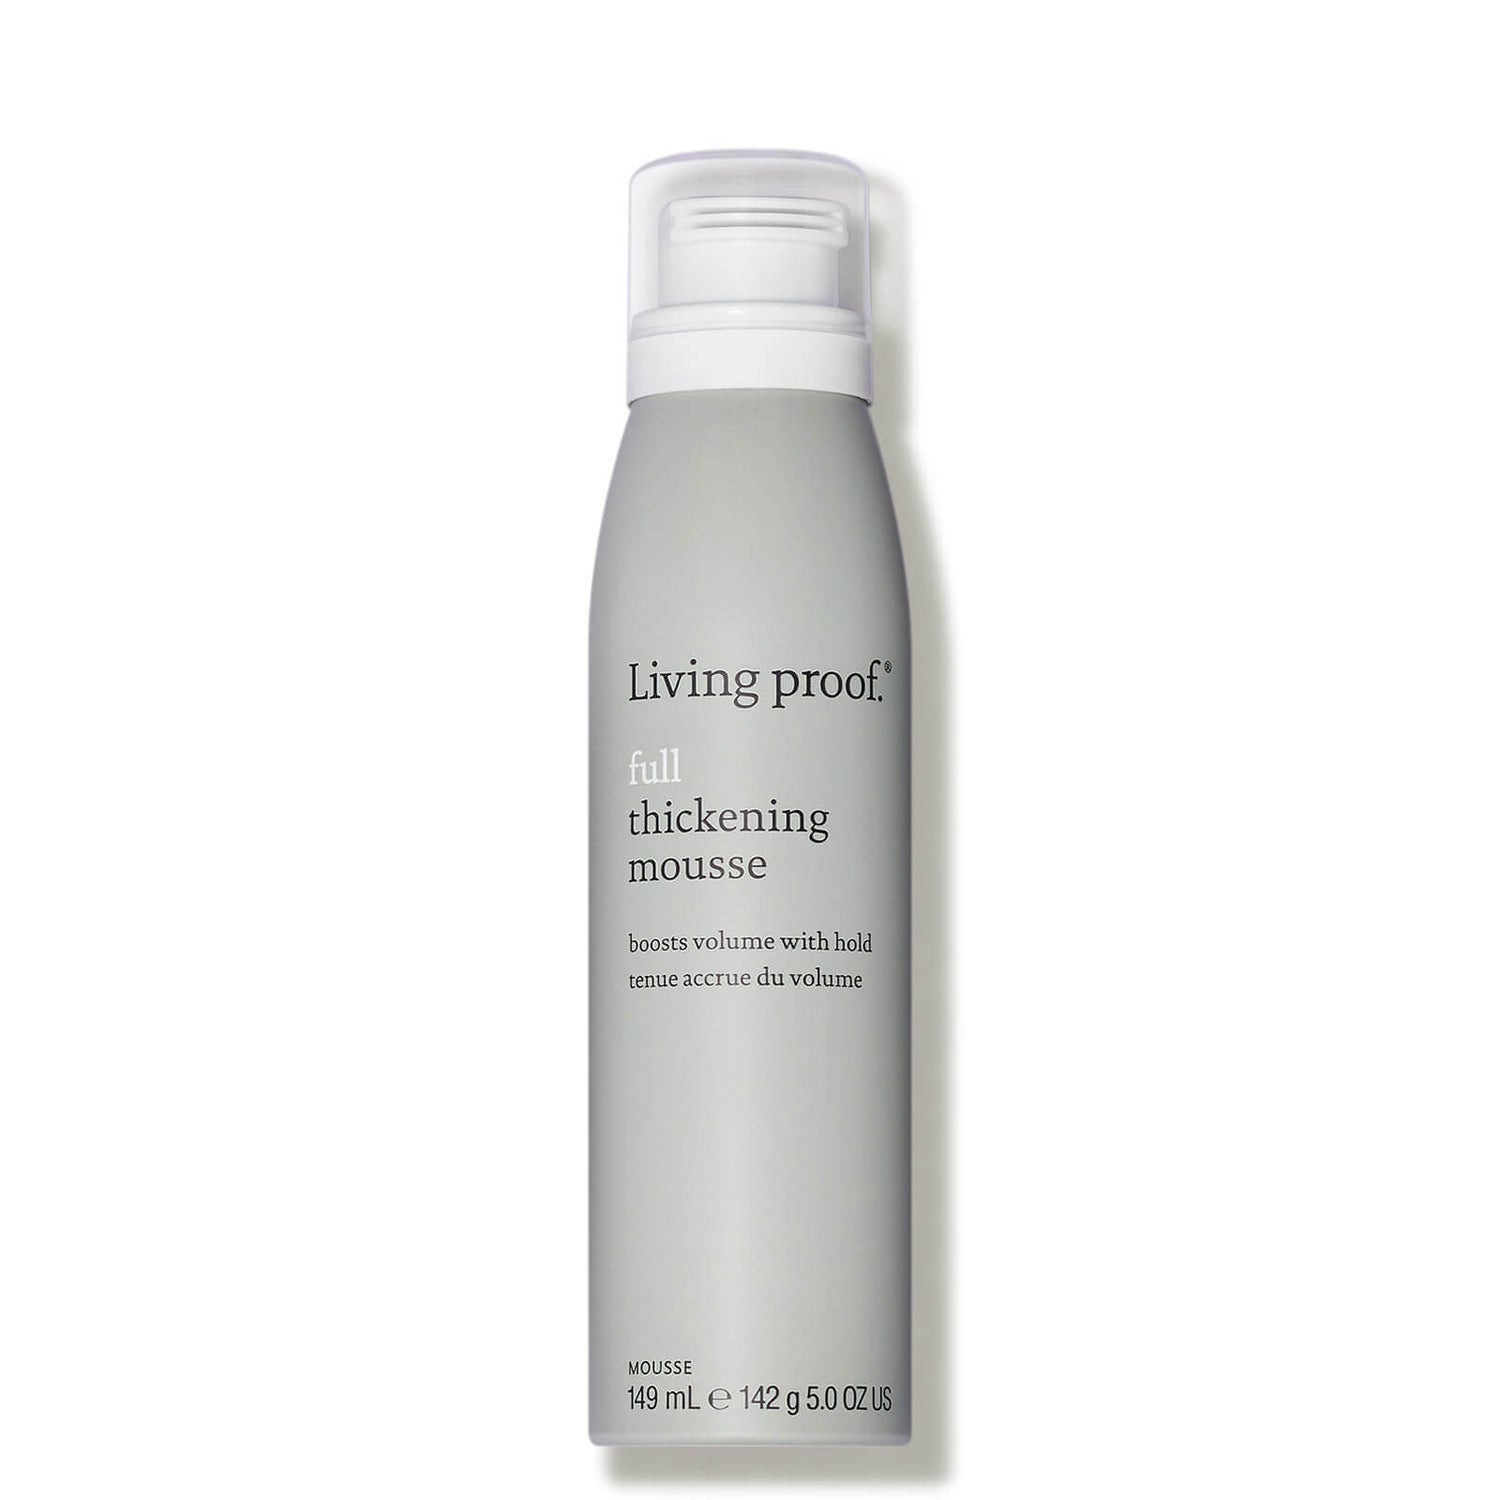 Living Proof Full Thickening Mousse 149 ml